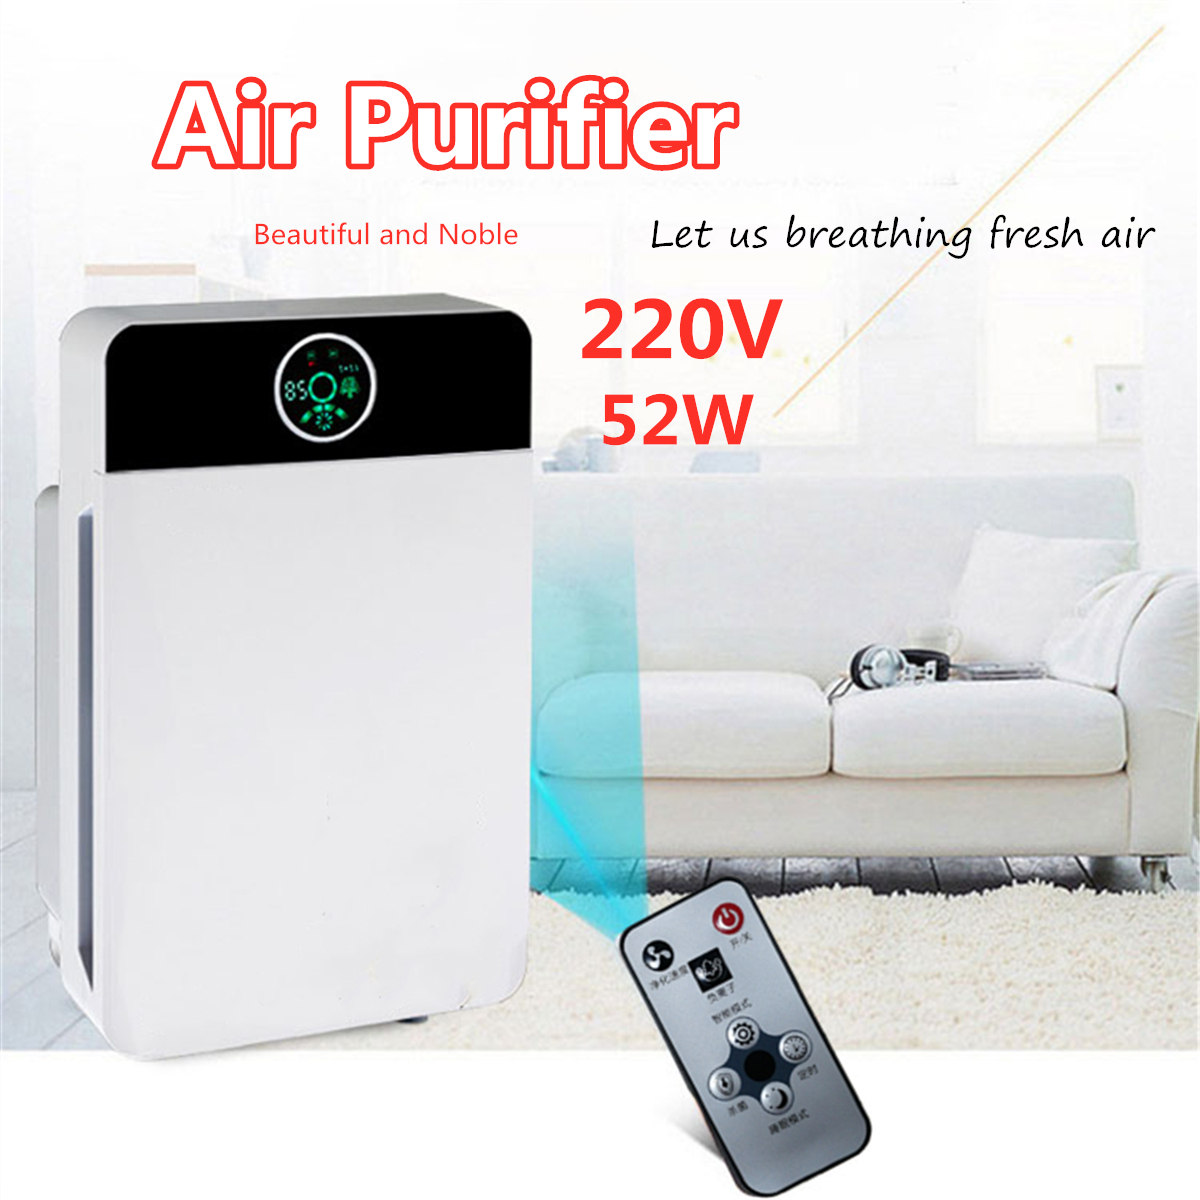 220V-Air-Purifier-Ozone-Anion-Allergens-Dust-Cleaner-Composite-Filter-W-Remote-Control-1432630-4